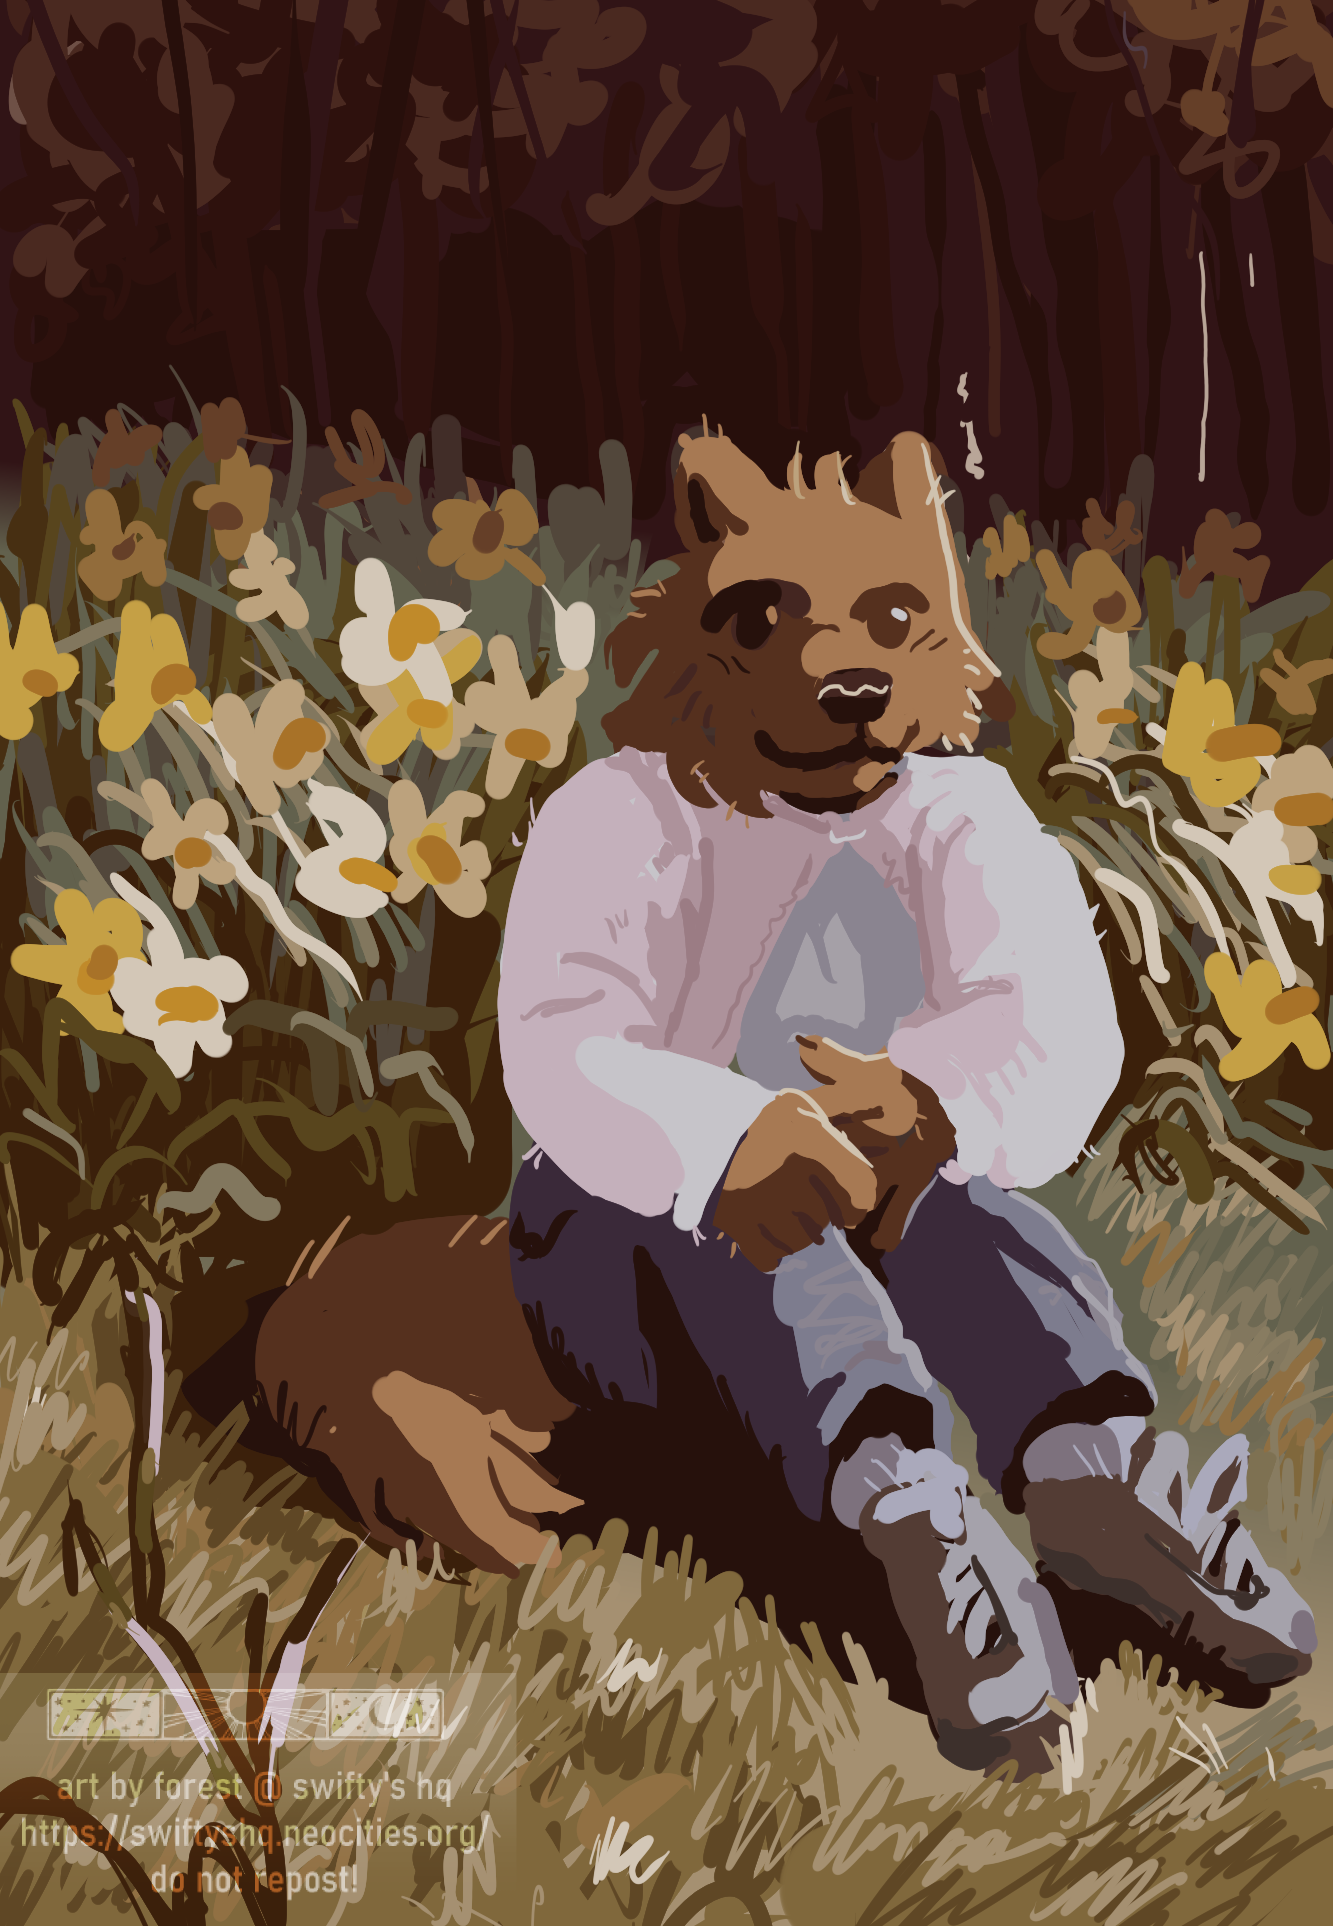 a brown canine furry sits in a warm field of daffodils. there is a dark thicket of trees in the background. the furry is smiling, and wears jeans and a light overcoat.